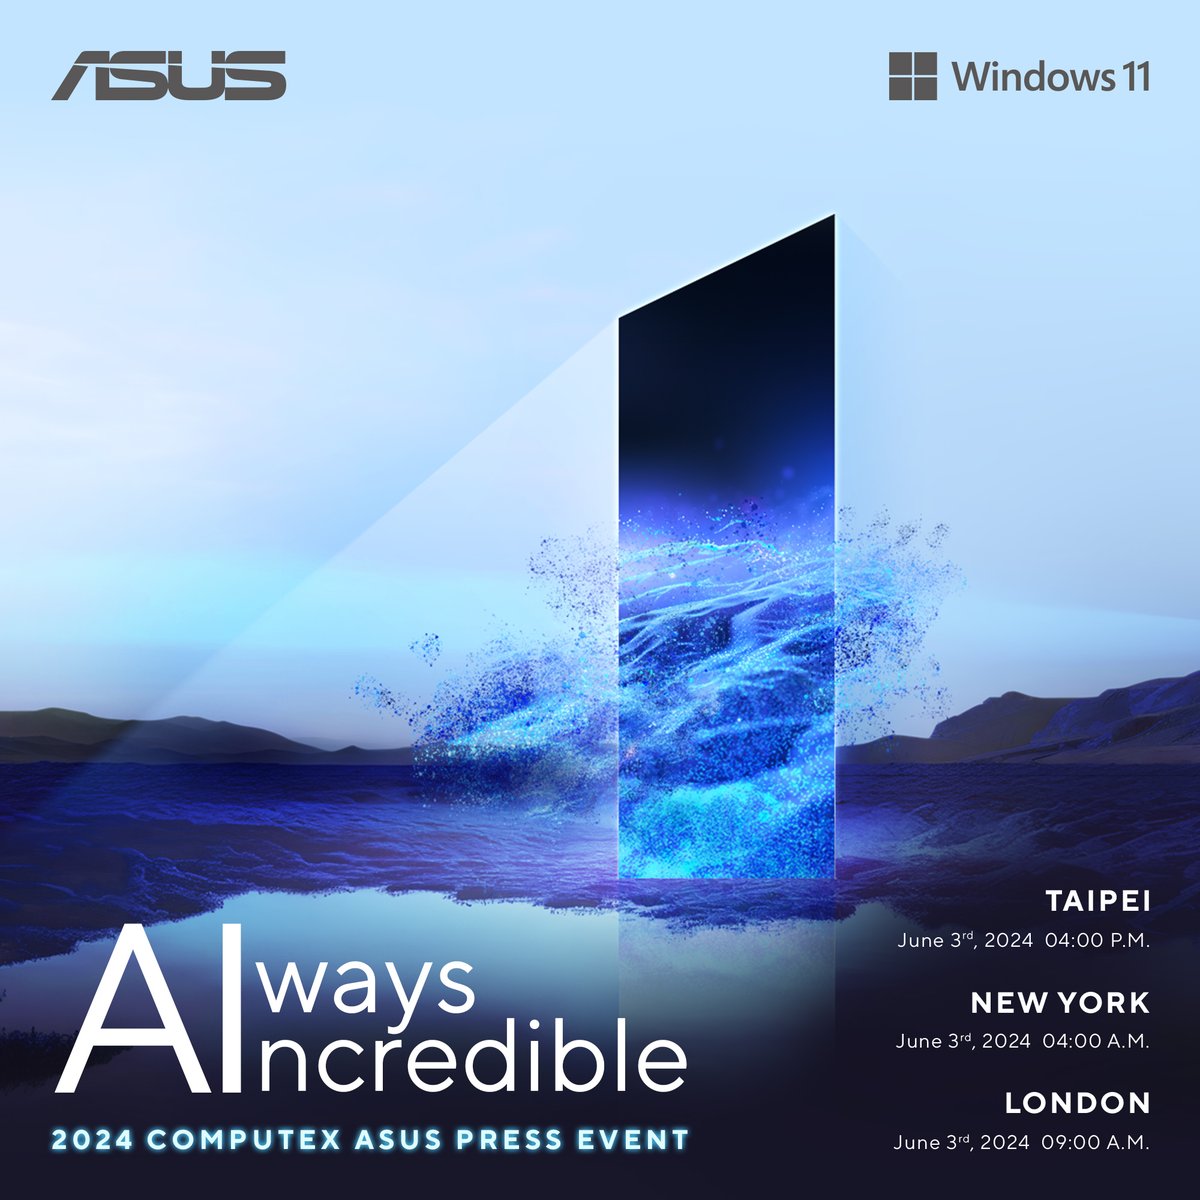 Welcome to the beginning of a new era.
Get ready to witness the unveiling of ASUS AI PCs at #COMPUTEX2024.

Save the date:
June 3rd, 01:00 a.m. (PST)
👉Join the ASUS Press Event Live asus.click/computex24_tw

#AlwaysIncredible
#ASUS #ProArt